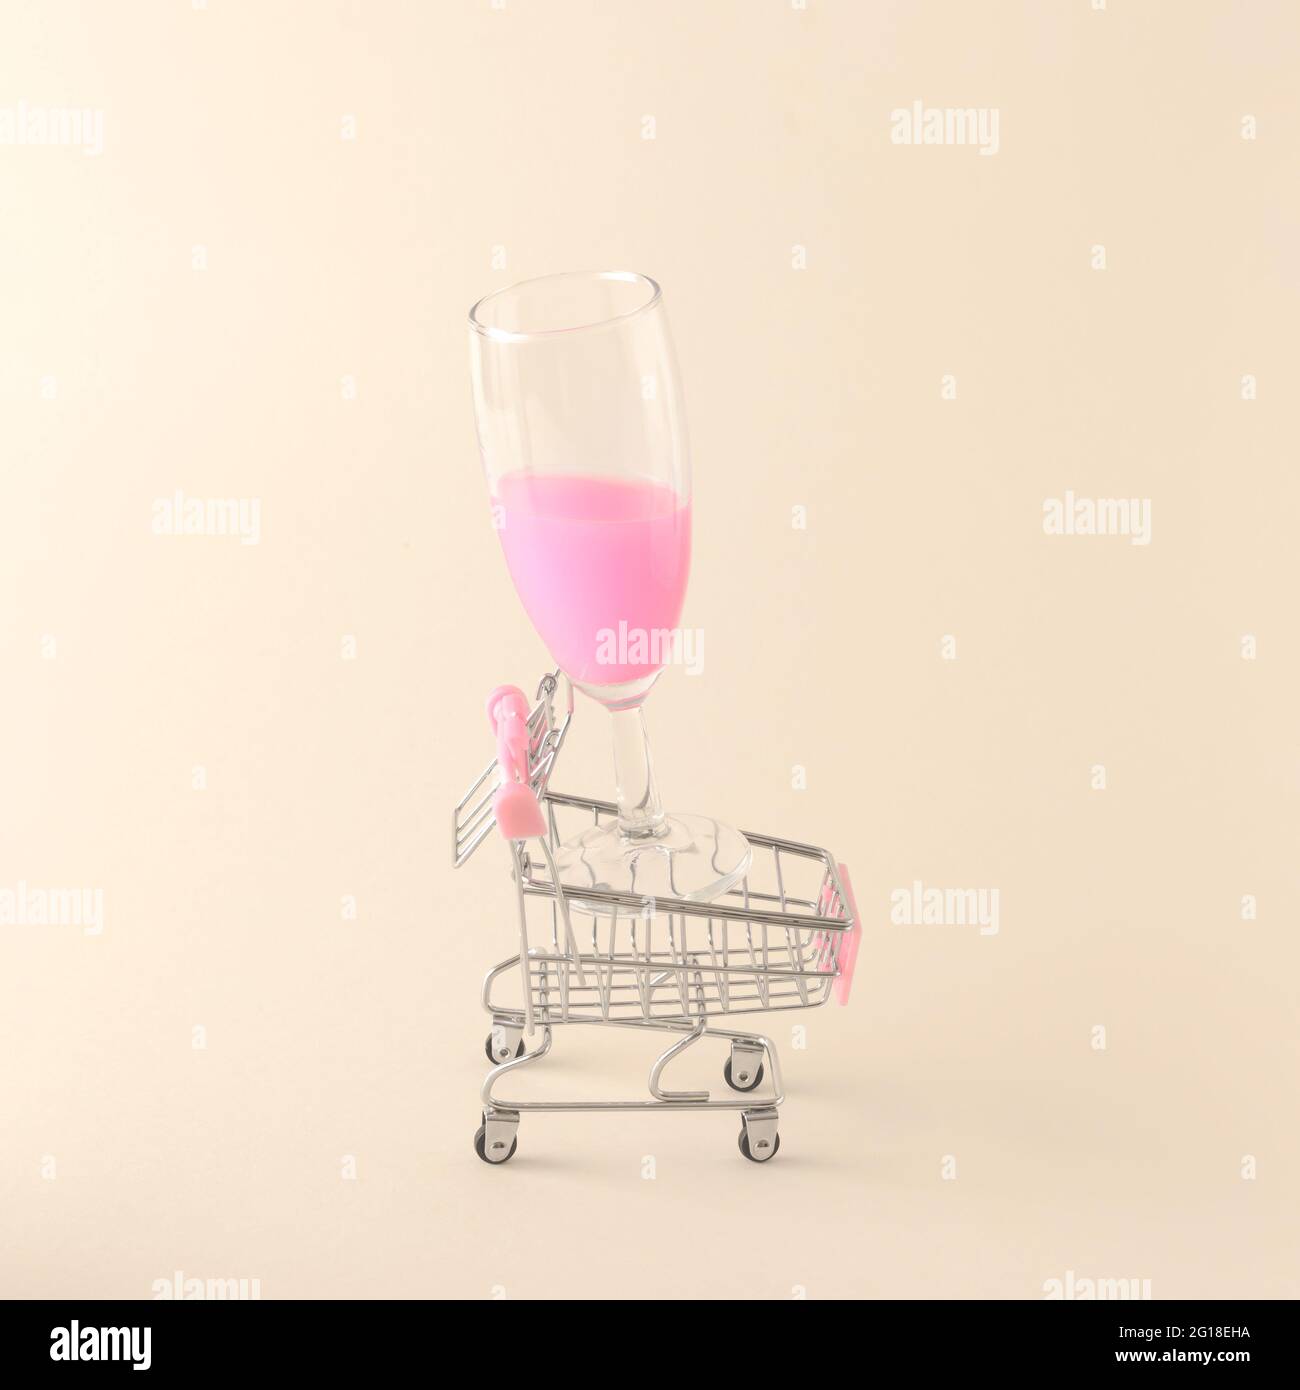 Neon pink champagne drink in a champagne glass set in a shopping cart on a cream background. Summer party concept of shopping and relaxation. Stock Photo